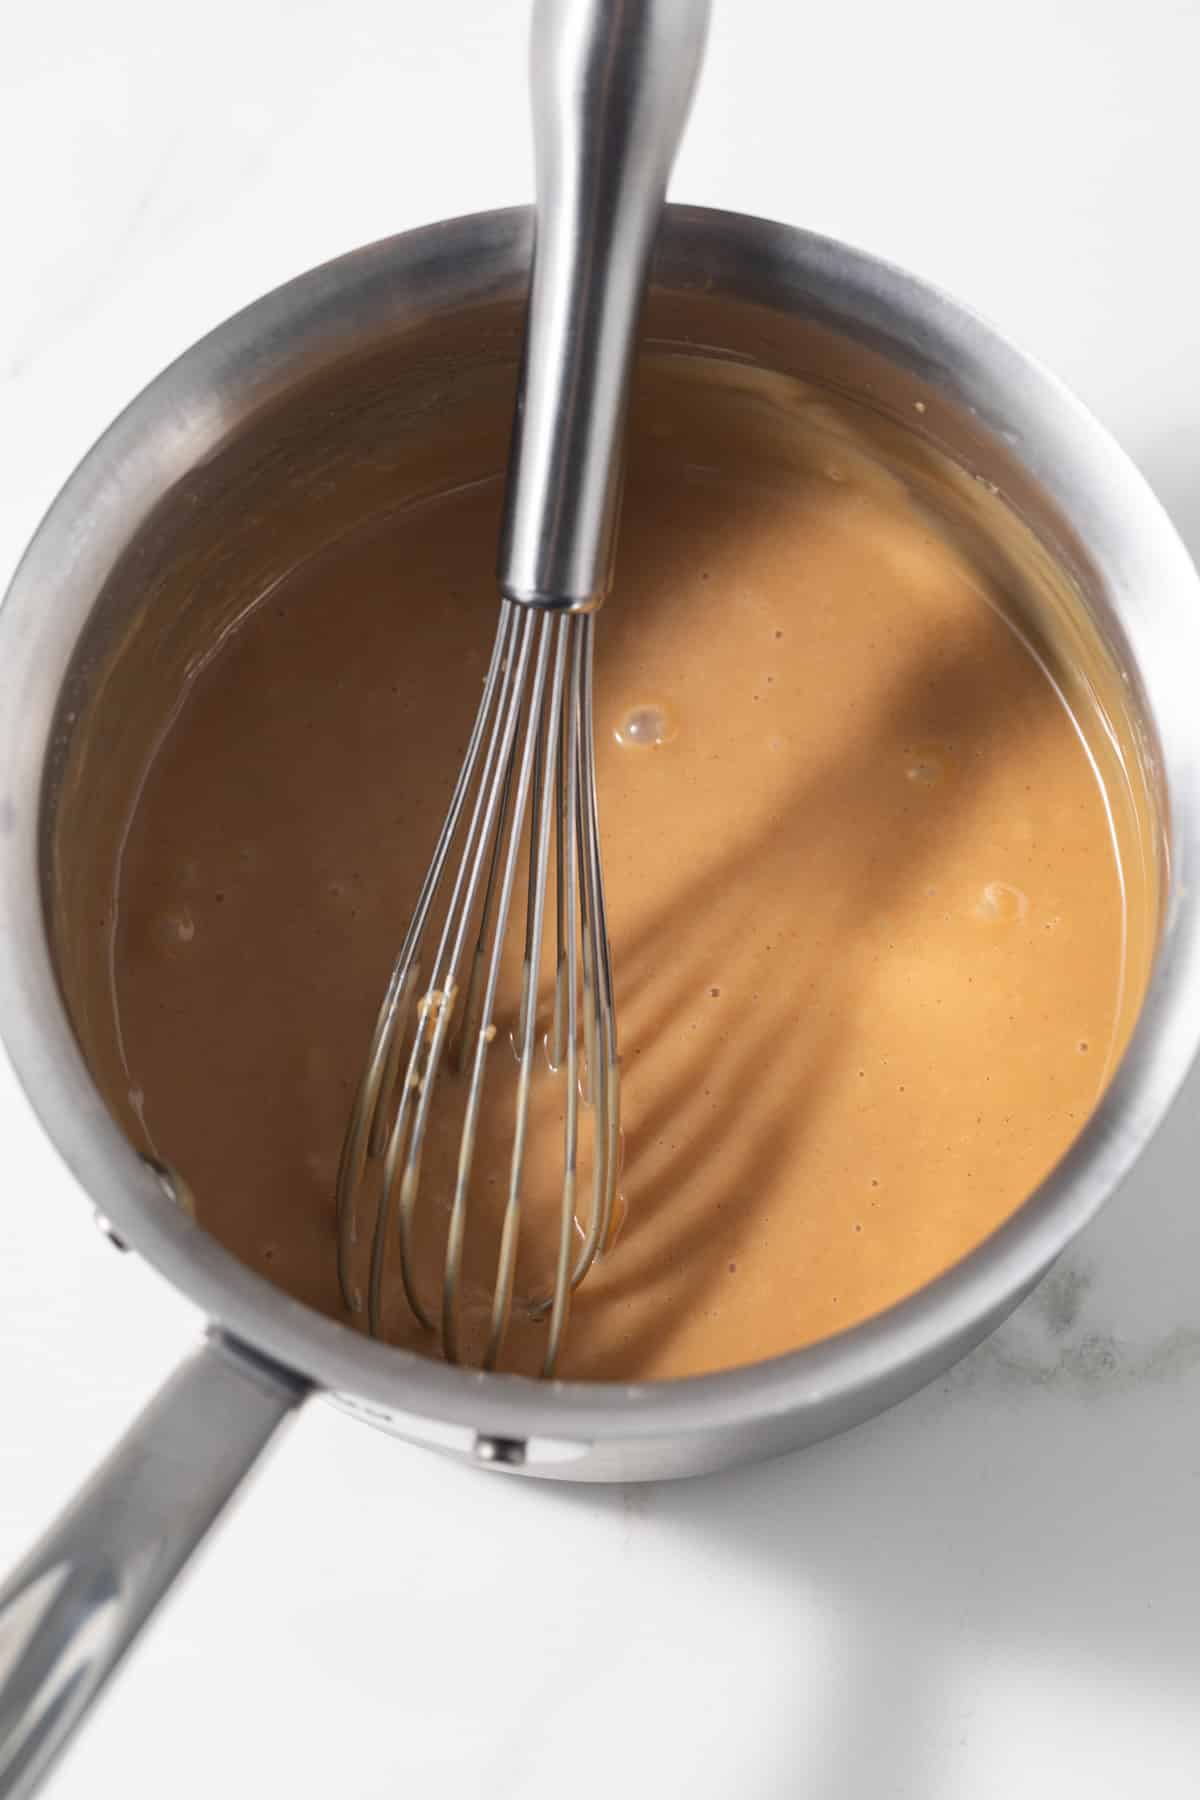 Peanut butter sauce in a saucepan with whisk.